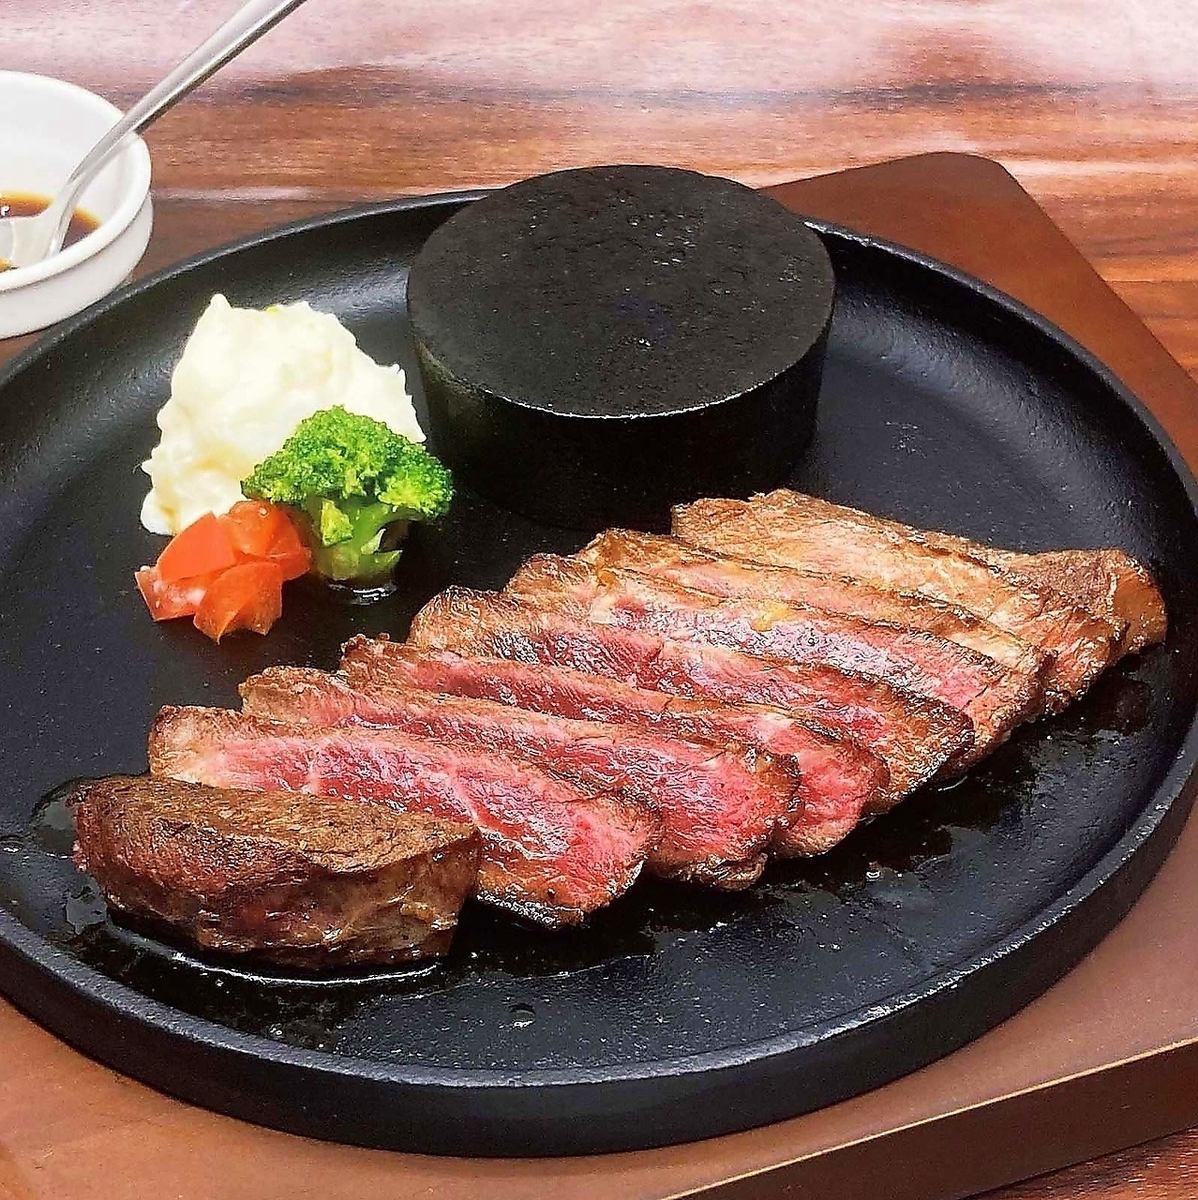 The beef rib eye steak is a recommended dish! Please try it!